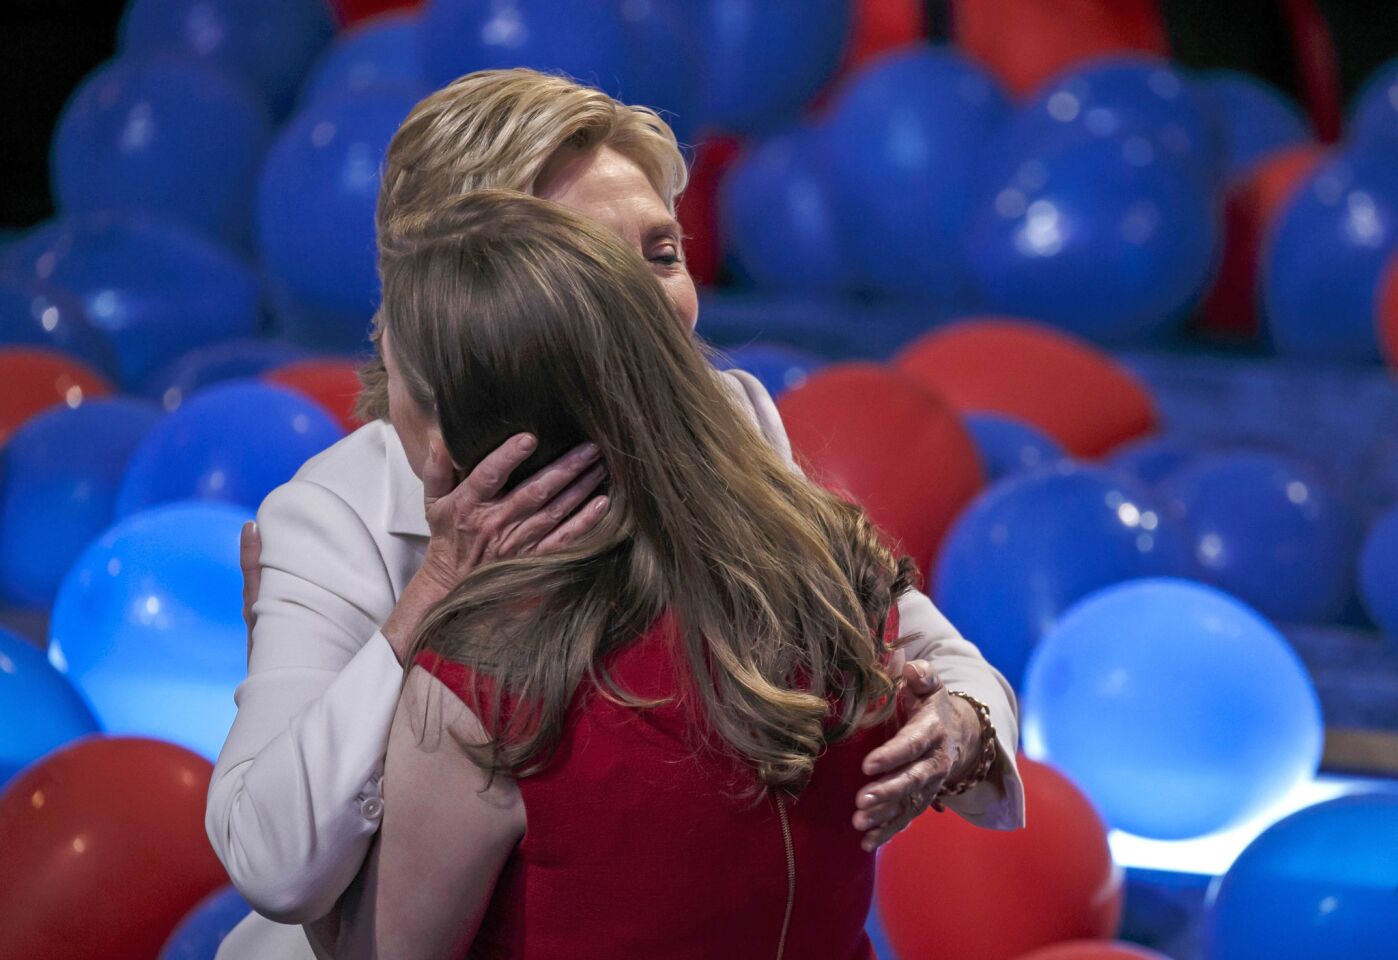 Hillary Clinton embraces her daughter, Chelsea Clinton, after wrapping up the 2016 Democratic National Convention in Philadelphia.